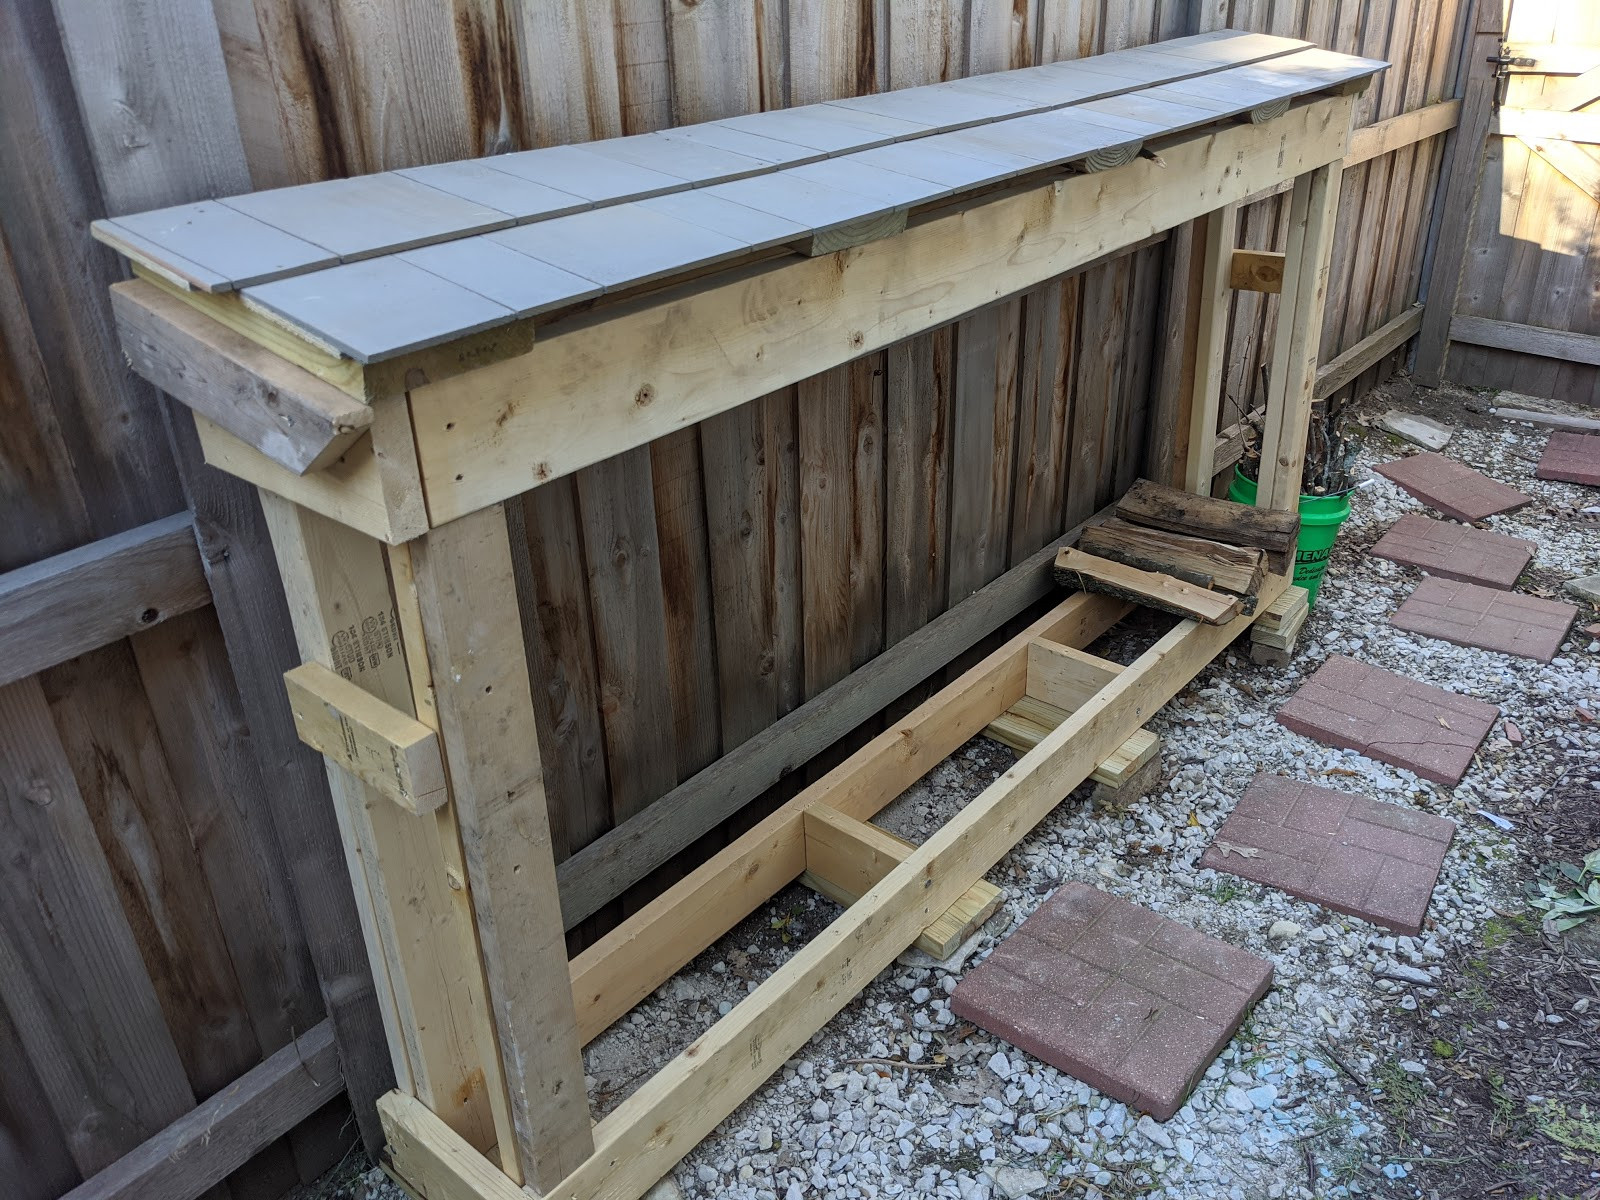 DIY Firewood Rack With Roof
 New DIY Firewood Rack with Roof Built August 2020